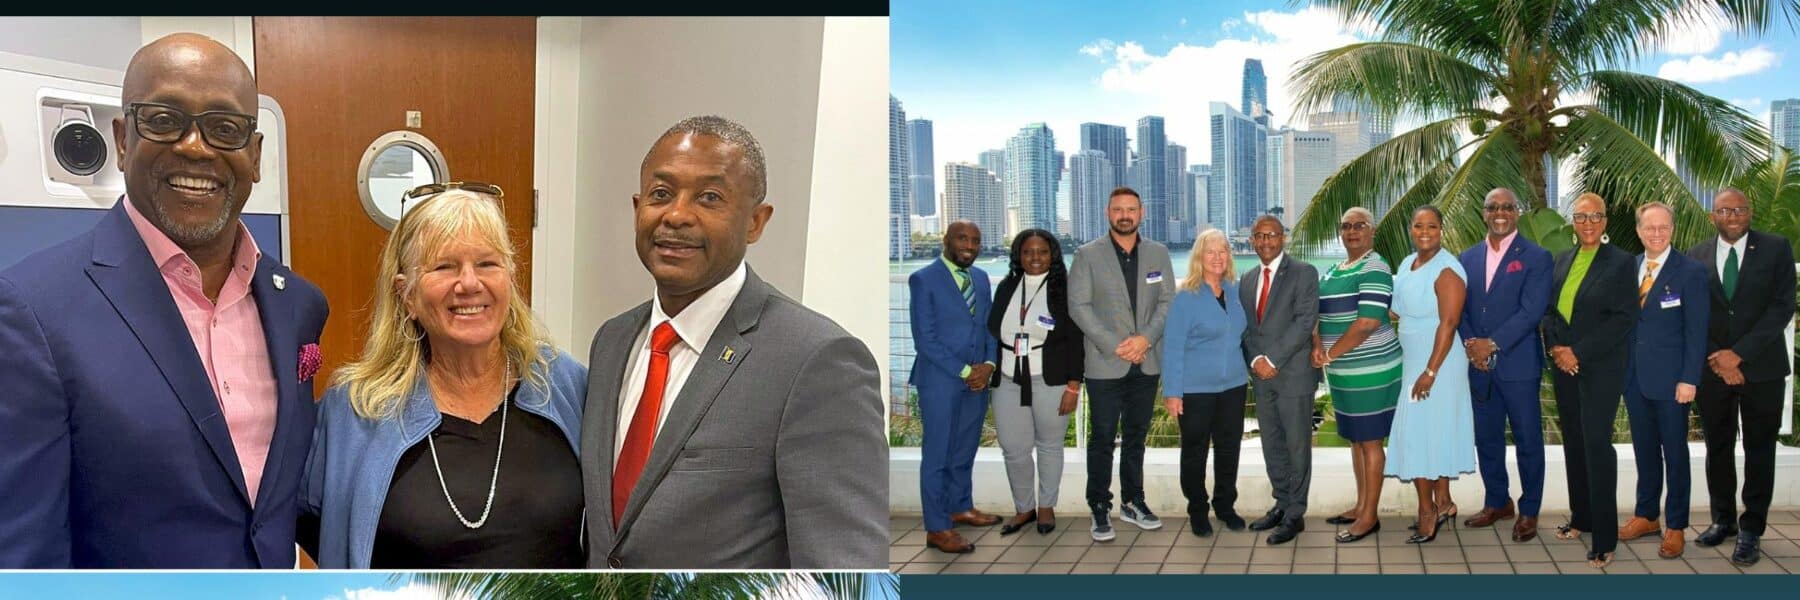 Barbados tourism minister cruises into action